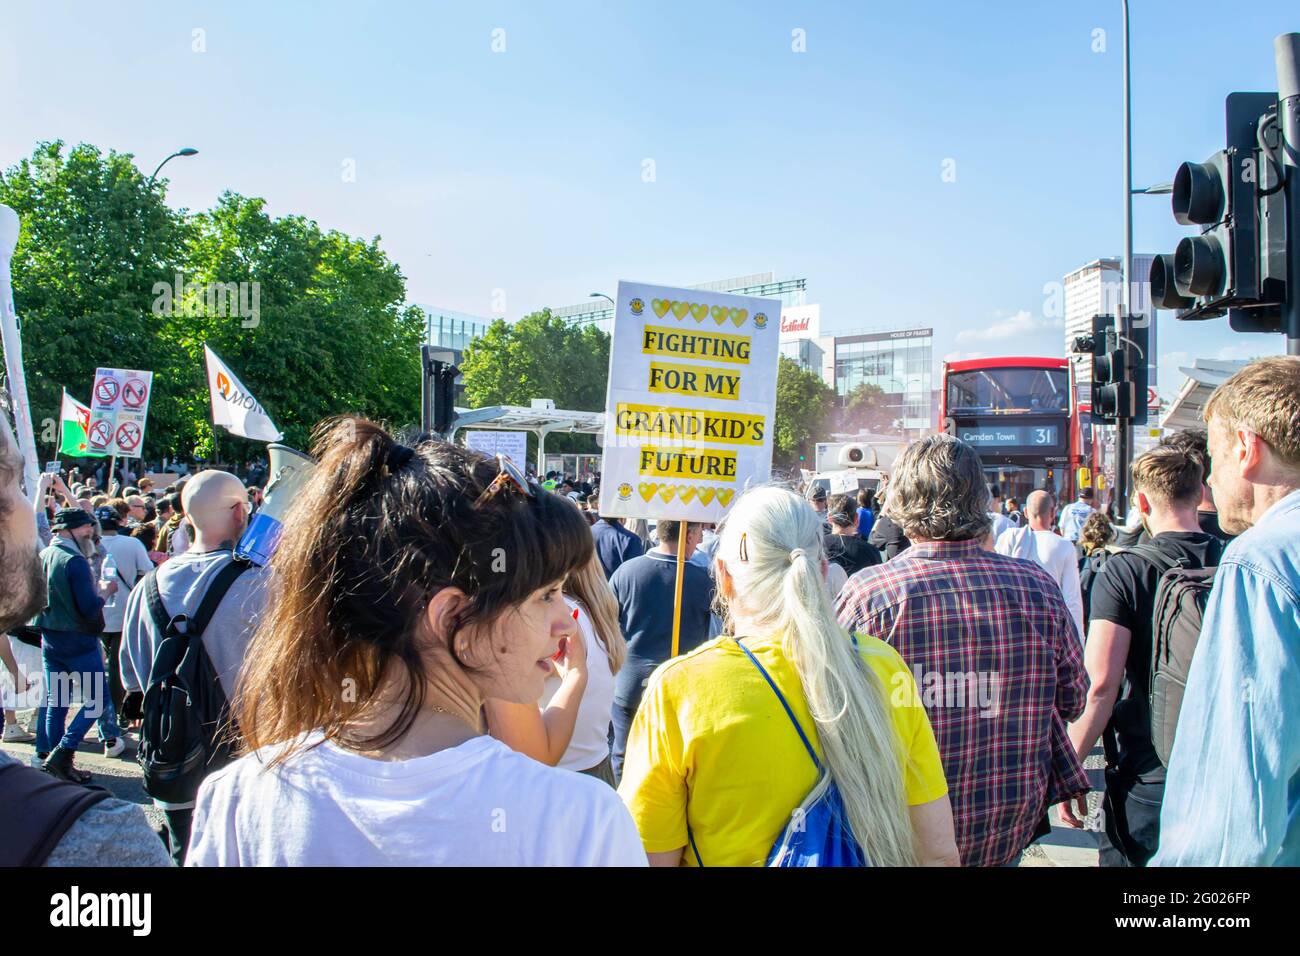 WHITE CITY, LONDON, ENGLAND- 29 May 2021: Protesters approaching Westfield White City during a Unite For Freedom anti-lockdown protest in London Stock Photo